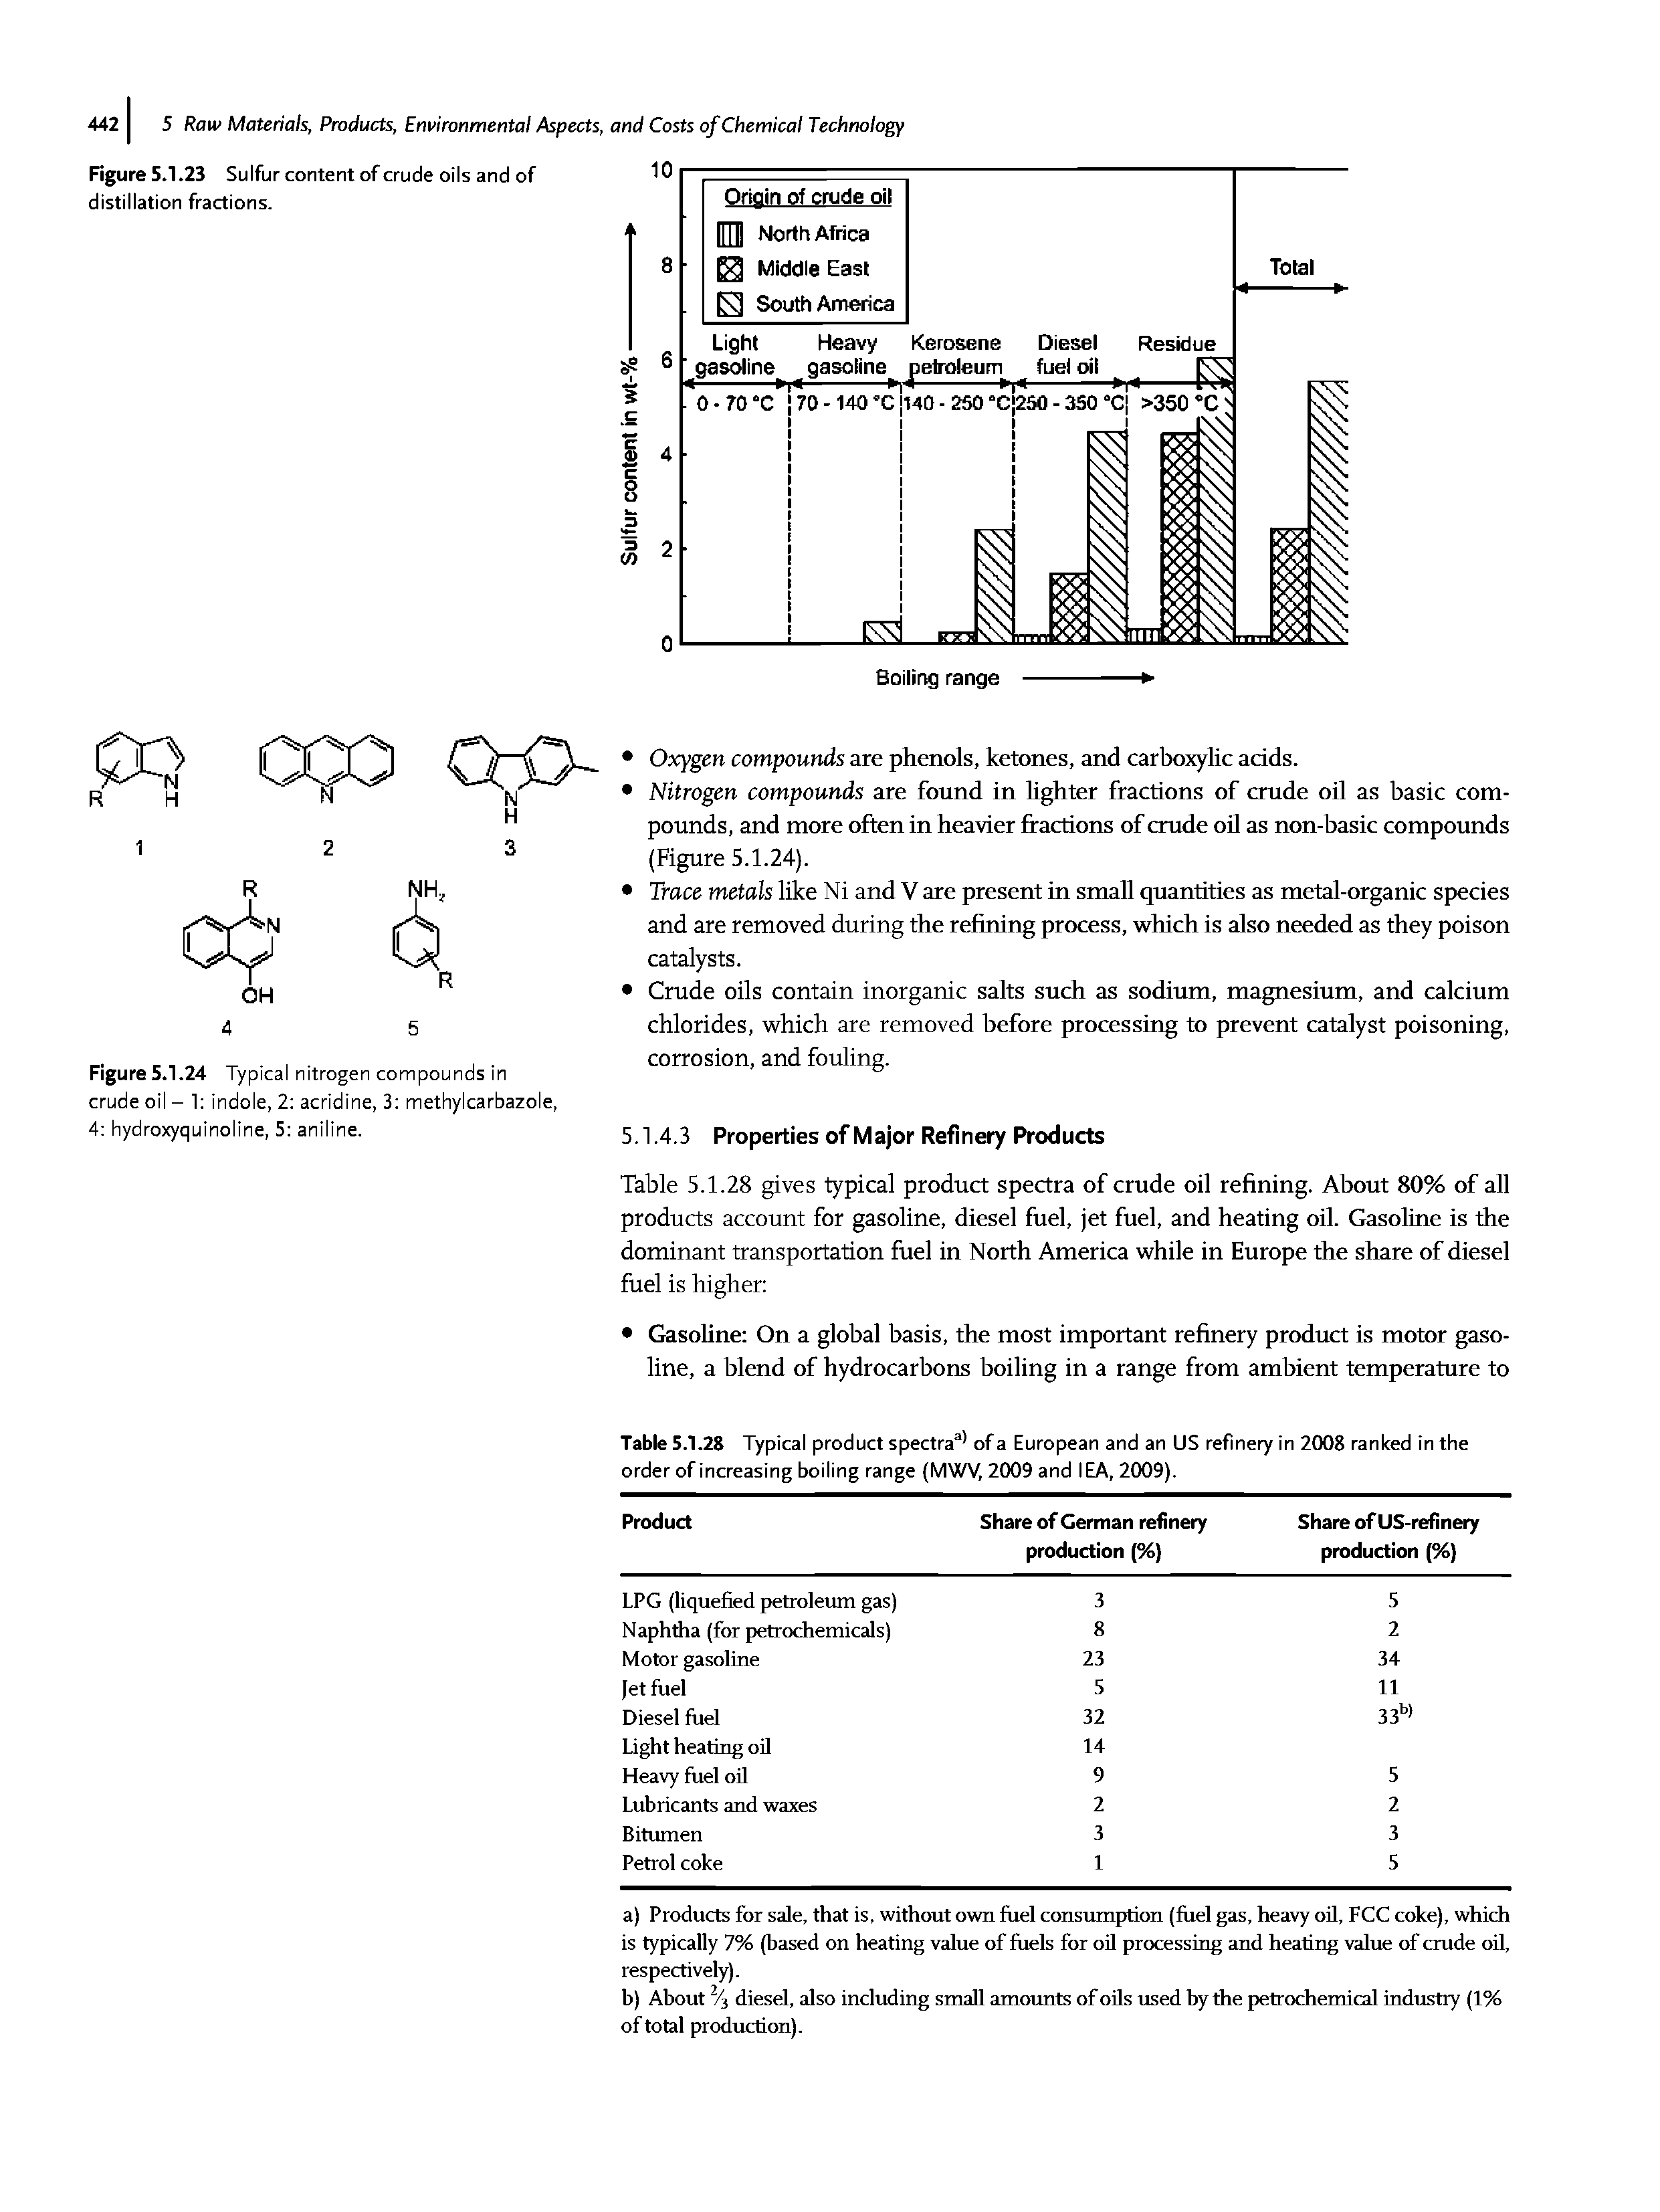 Figure 5.1.23 Sulfur content of crude oils and of distillation fractions.